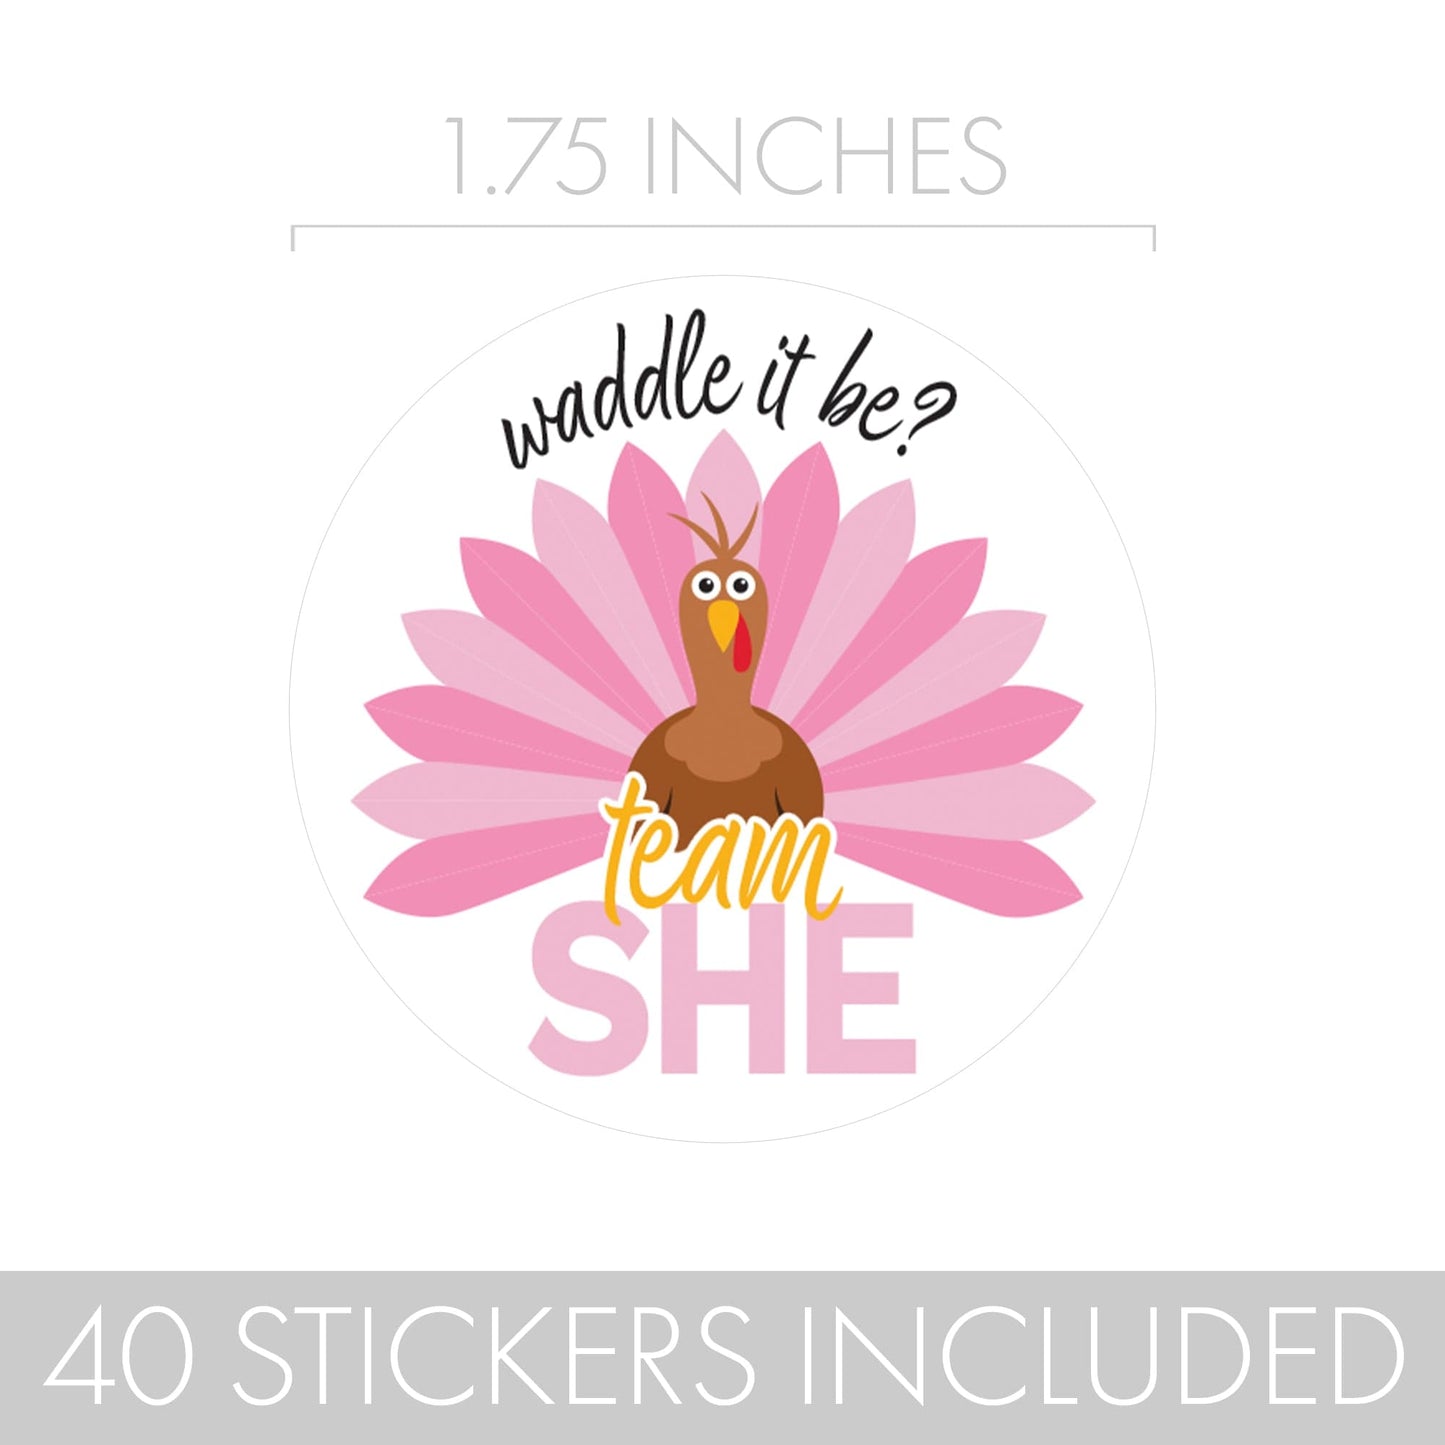 Thanksgiving Turkey Gender Reveal Stickers  - Team He or She - 40 Count